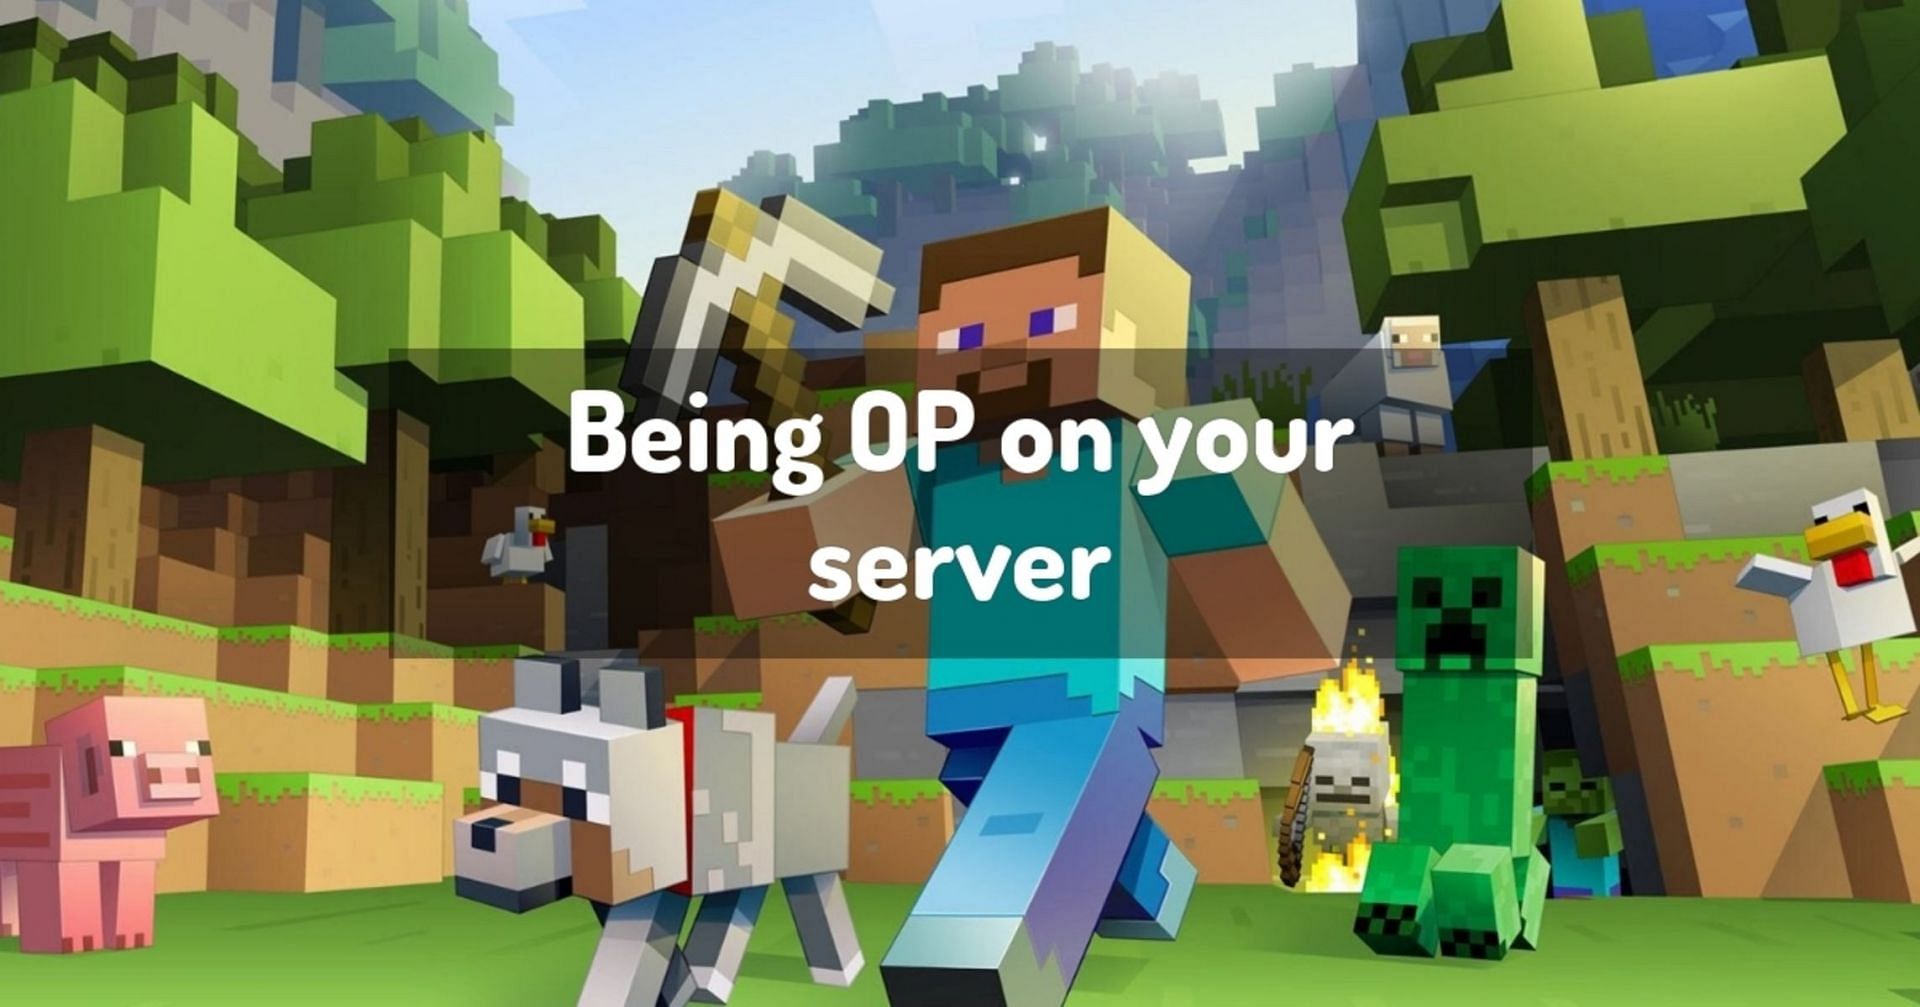 Becoming an operator in a Minecraft server provides a large number of tools not normally available to standard players (Image via Mojang).